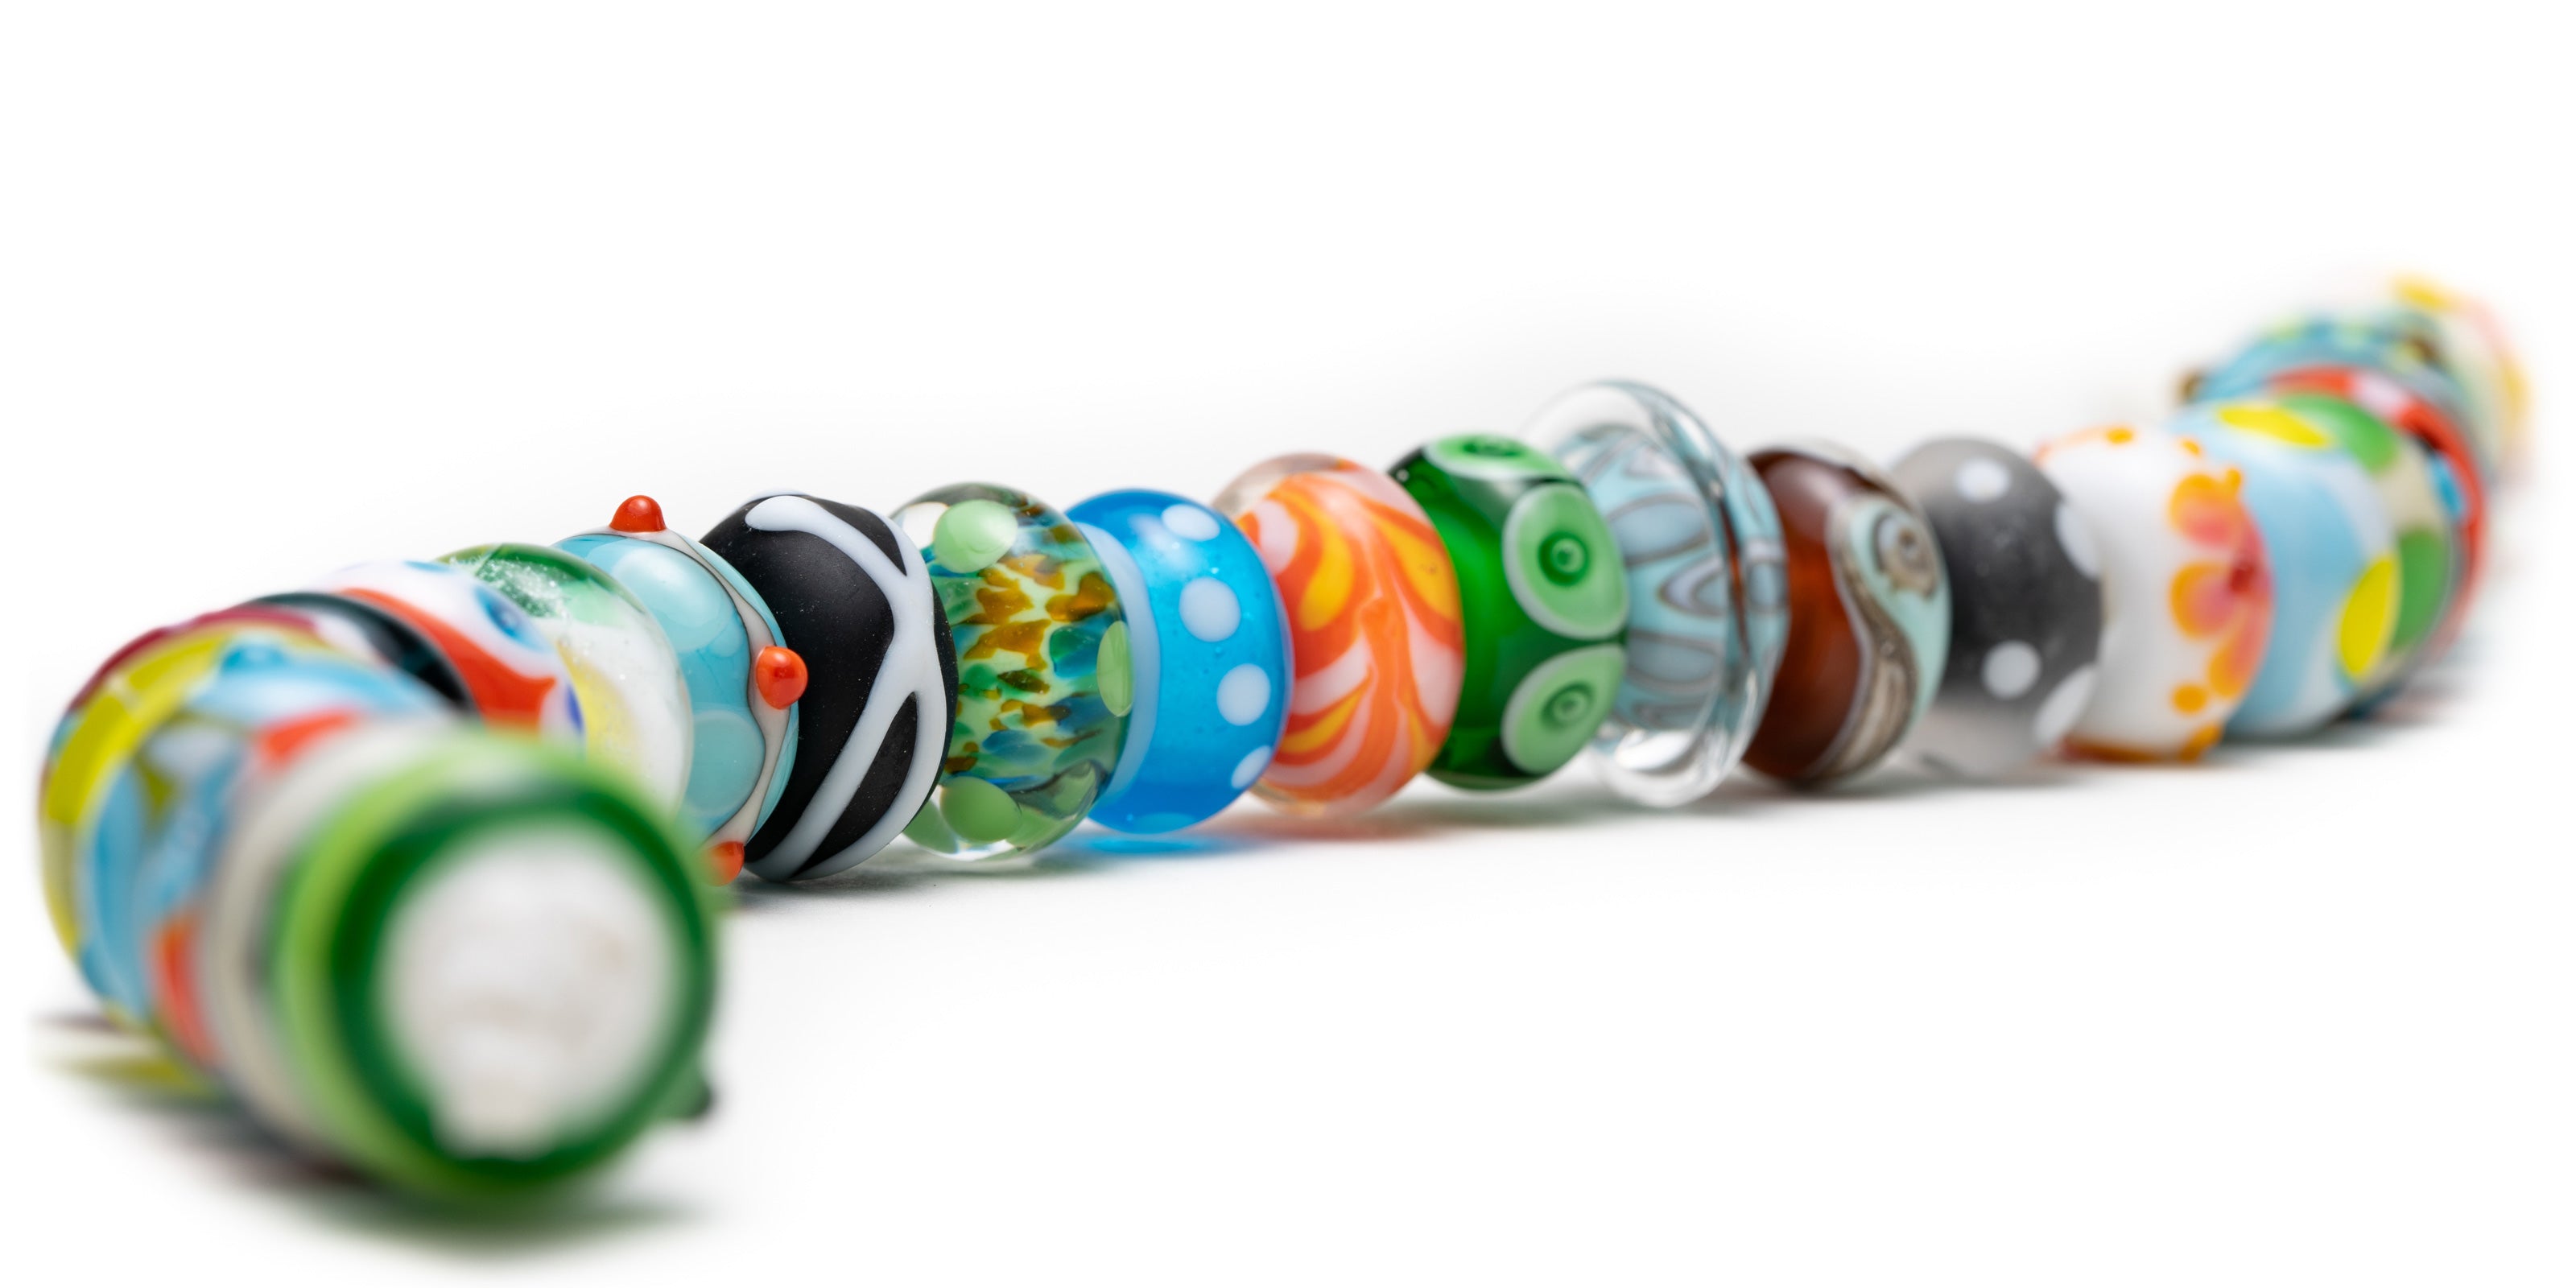 Bright, colourful Murano glass beads in a row.